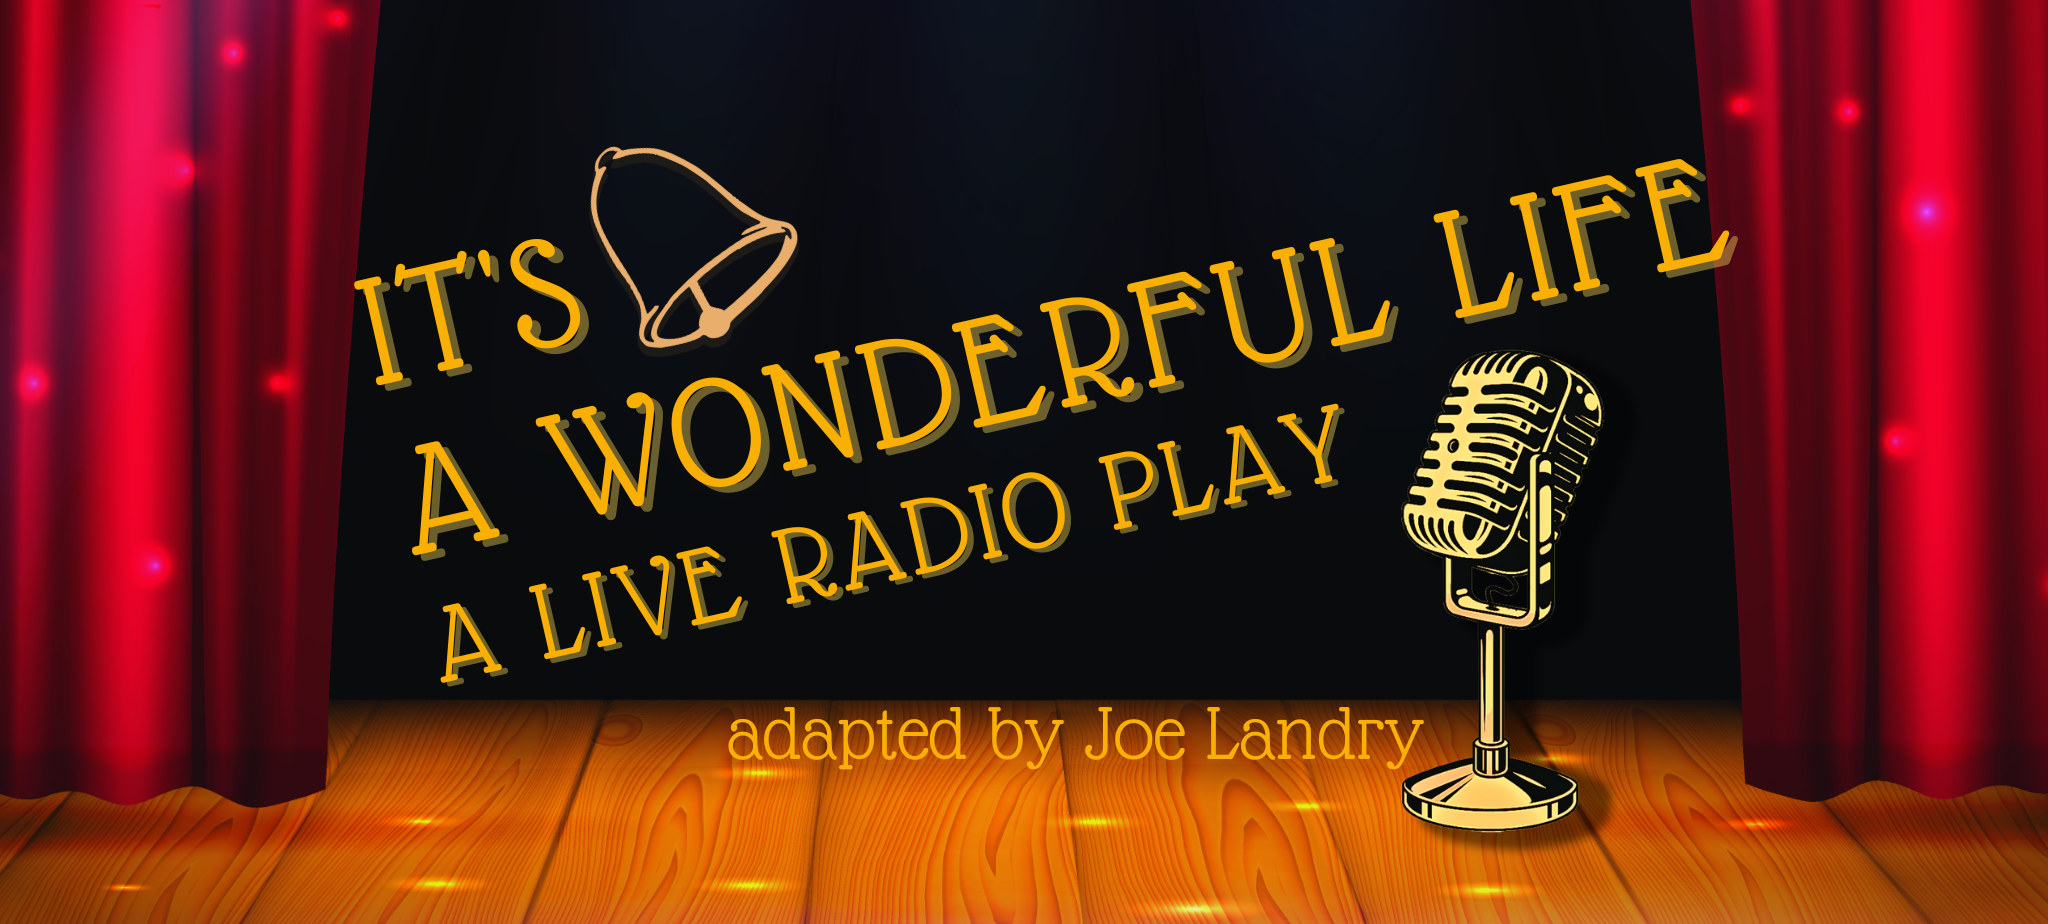 Stage with curtains and a 1930s radio microphone on it. TEXT: It's a Wonderful Life a LIve Radio Play adapted by Joe Landry